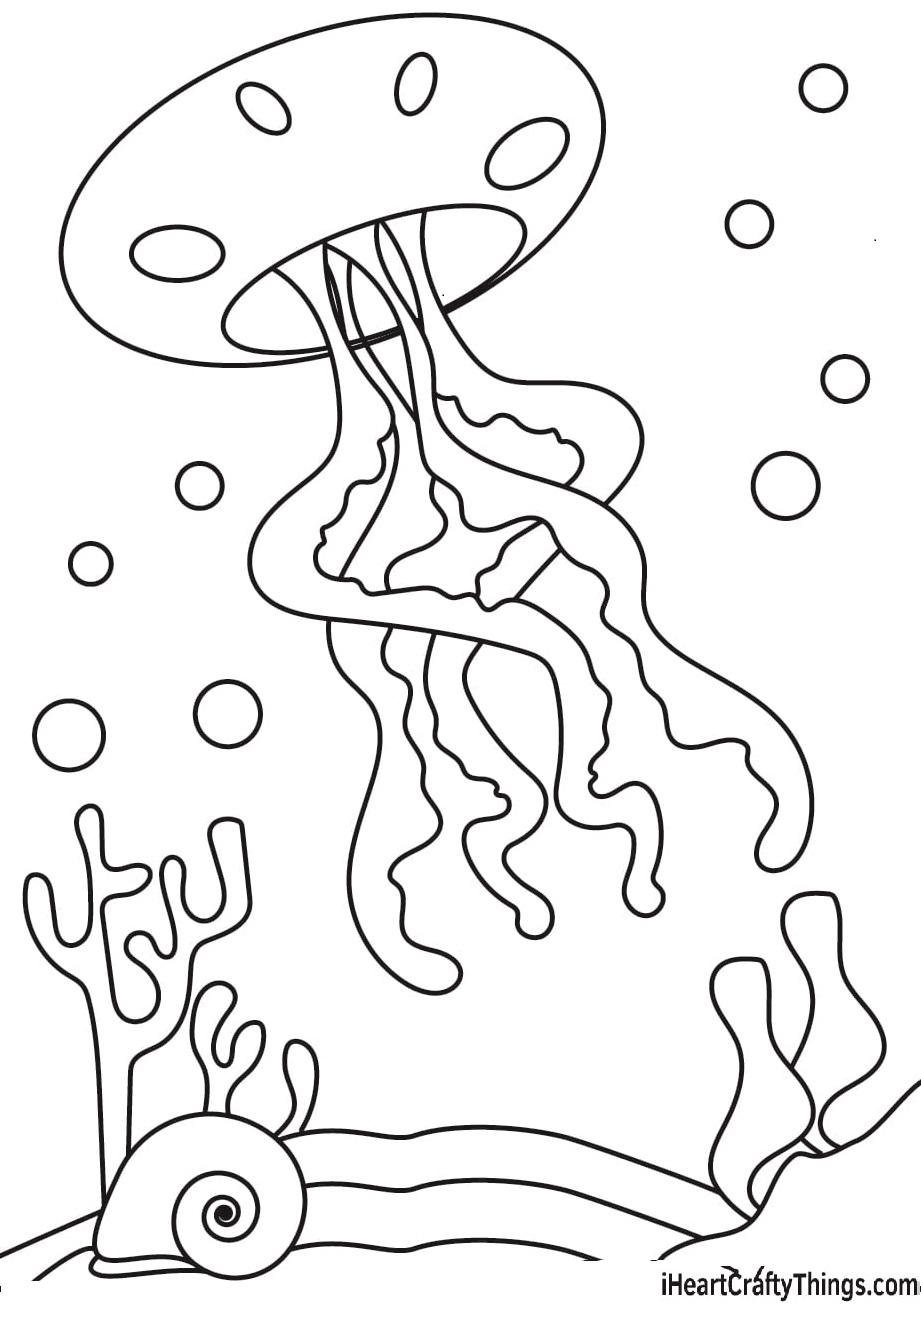 Image Of Box Jellyfish For Kids